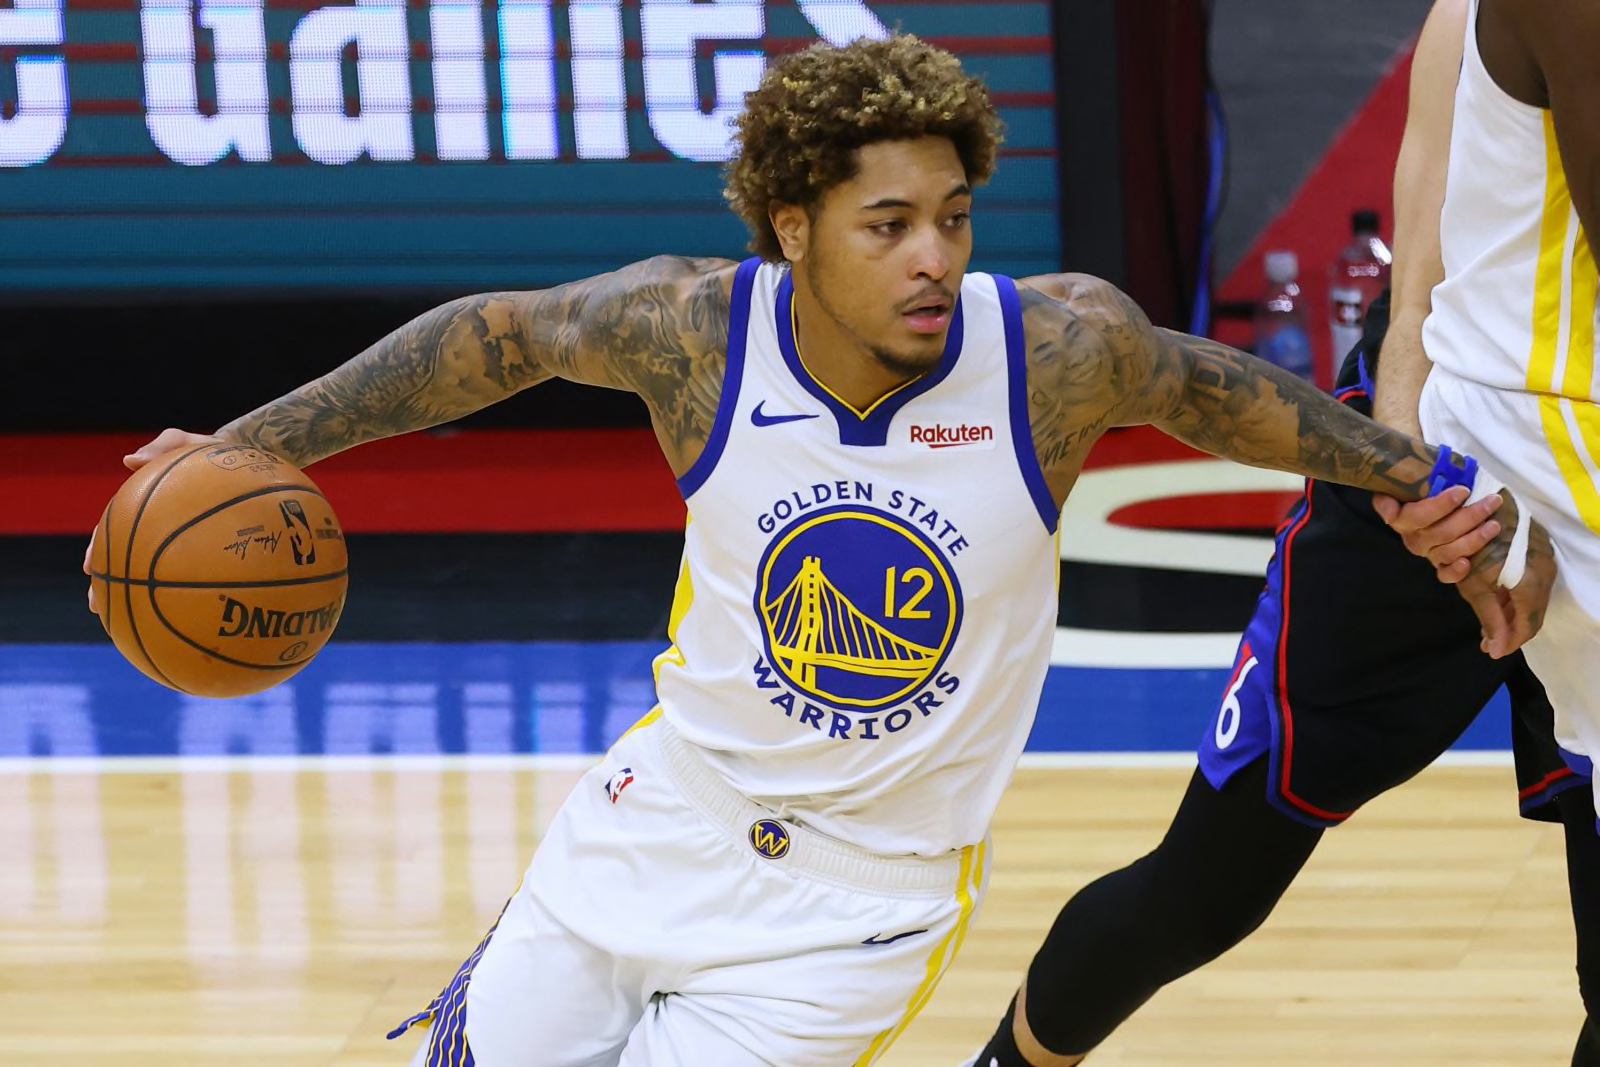 Kelly Oubre Jr. hopes to find long-term home with Warriors